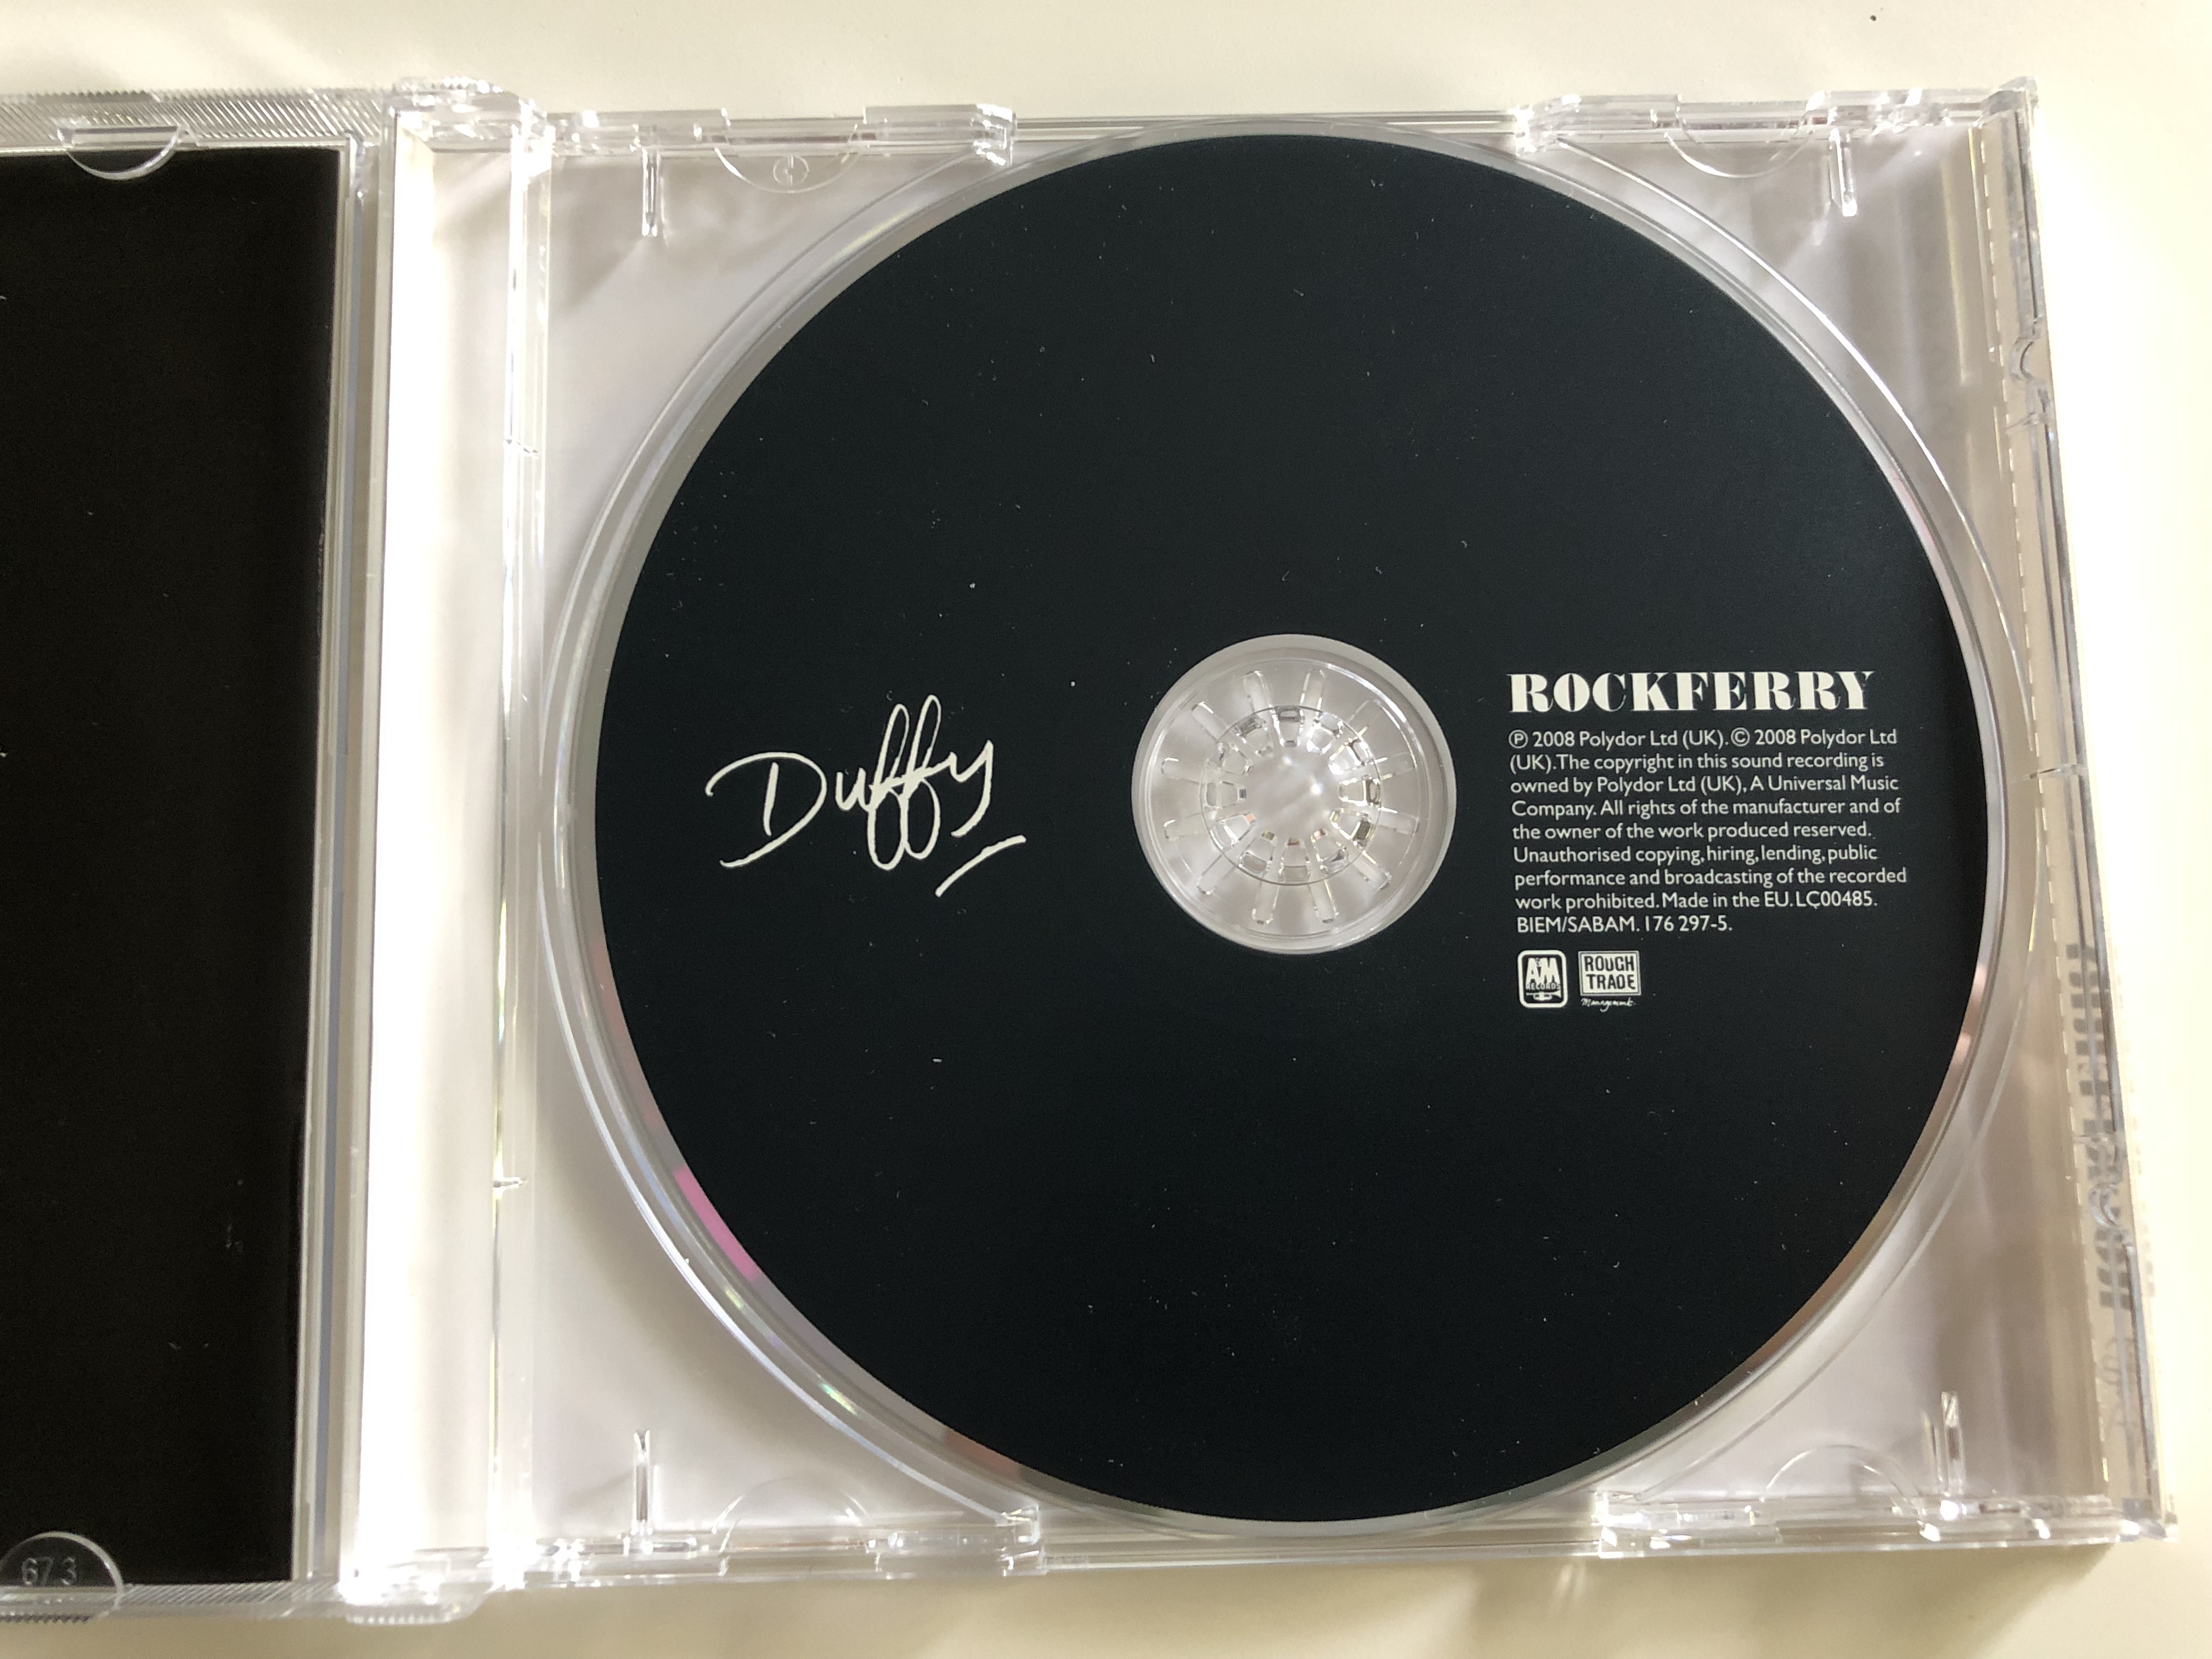 duffy-rockferry-serious-stepping-stone-mercy-distant-dreamer-audio-cd-2008-polydor-176297-5-3-.jpg